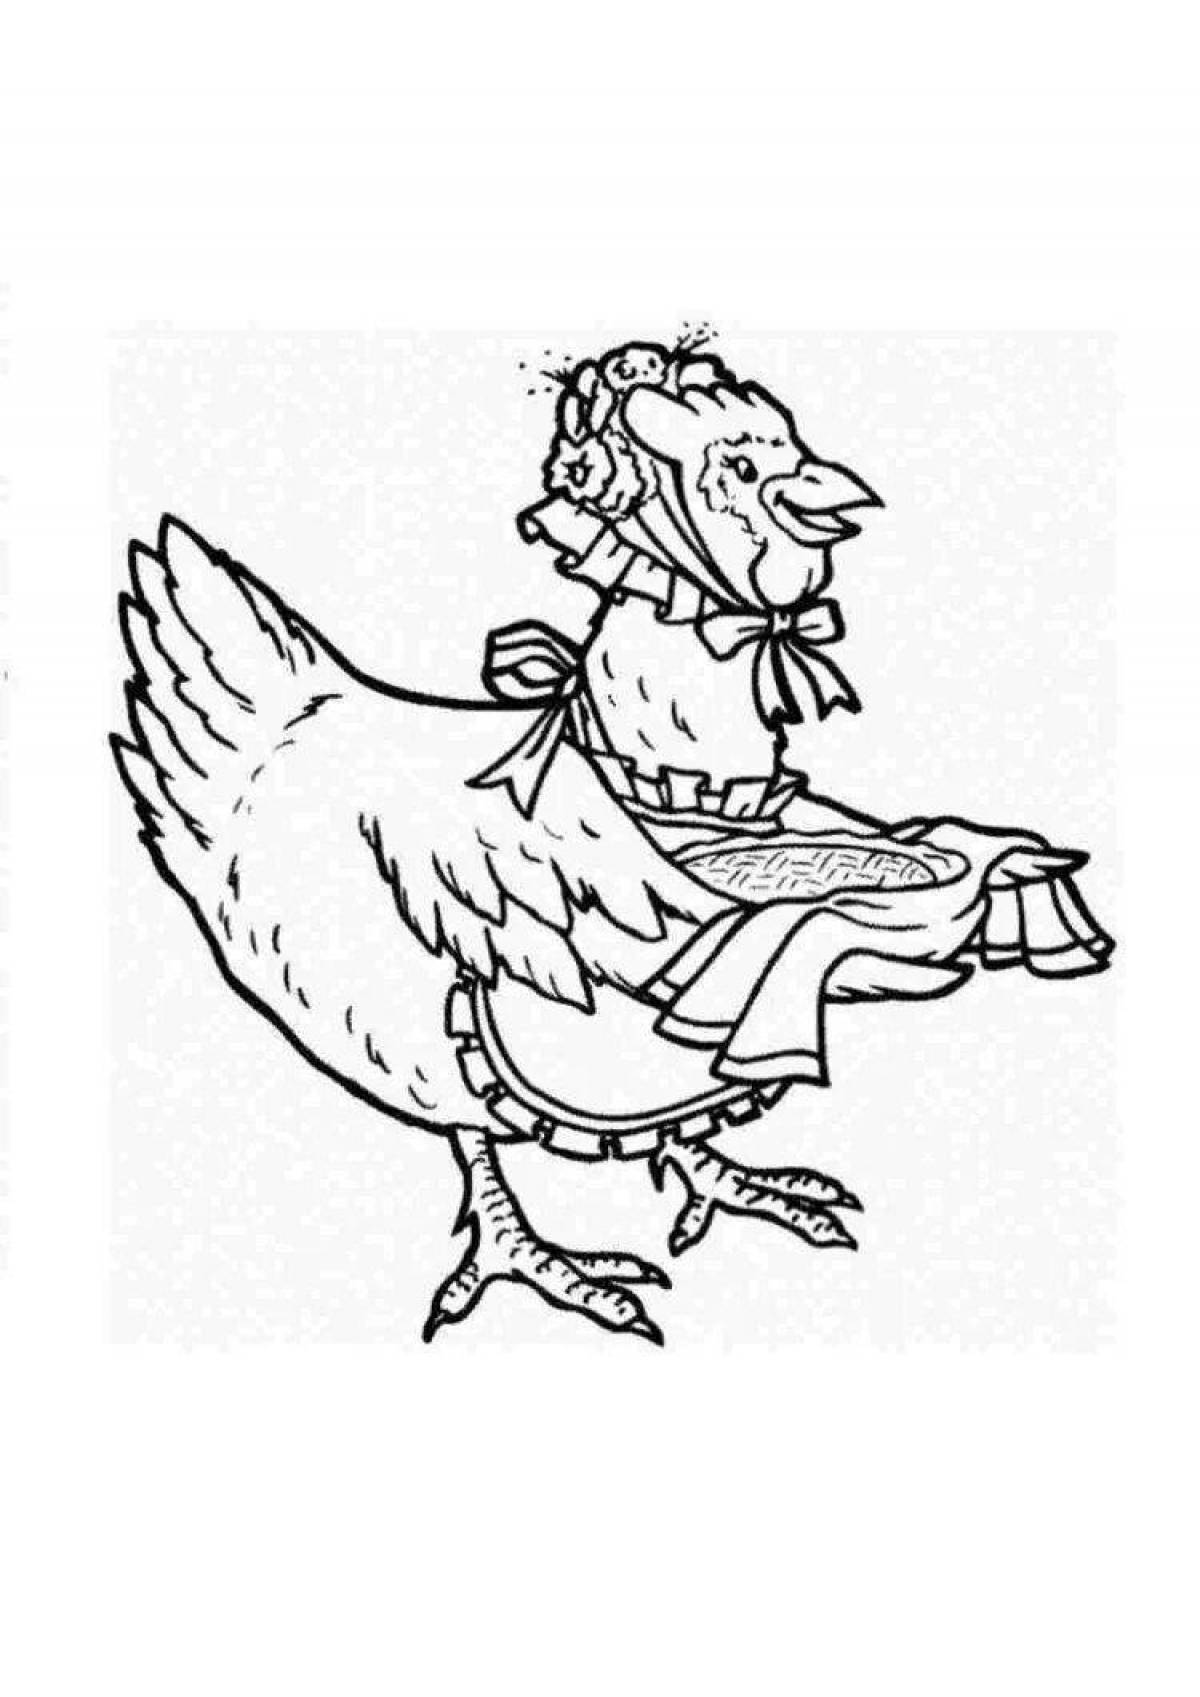 Gorgeous black chicken coloring page